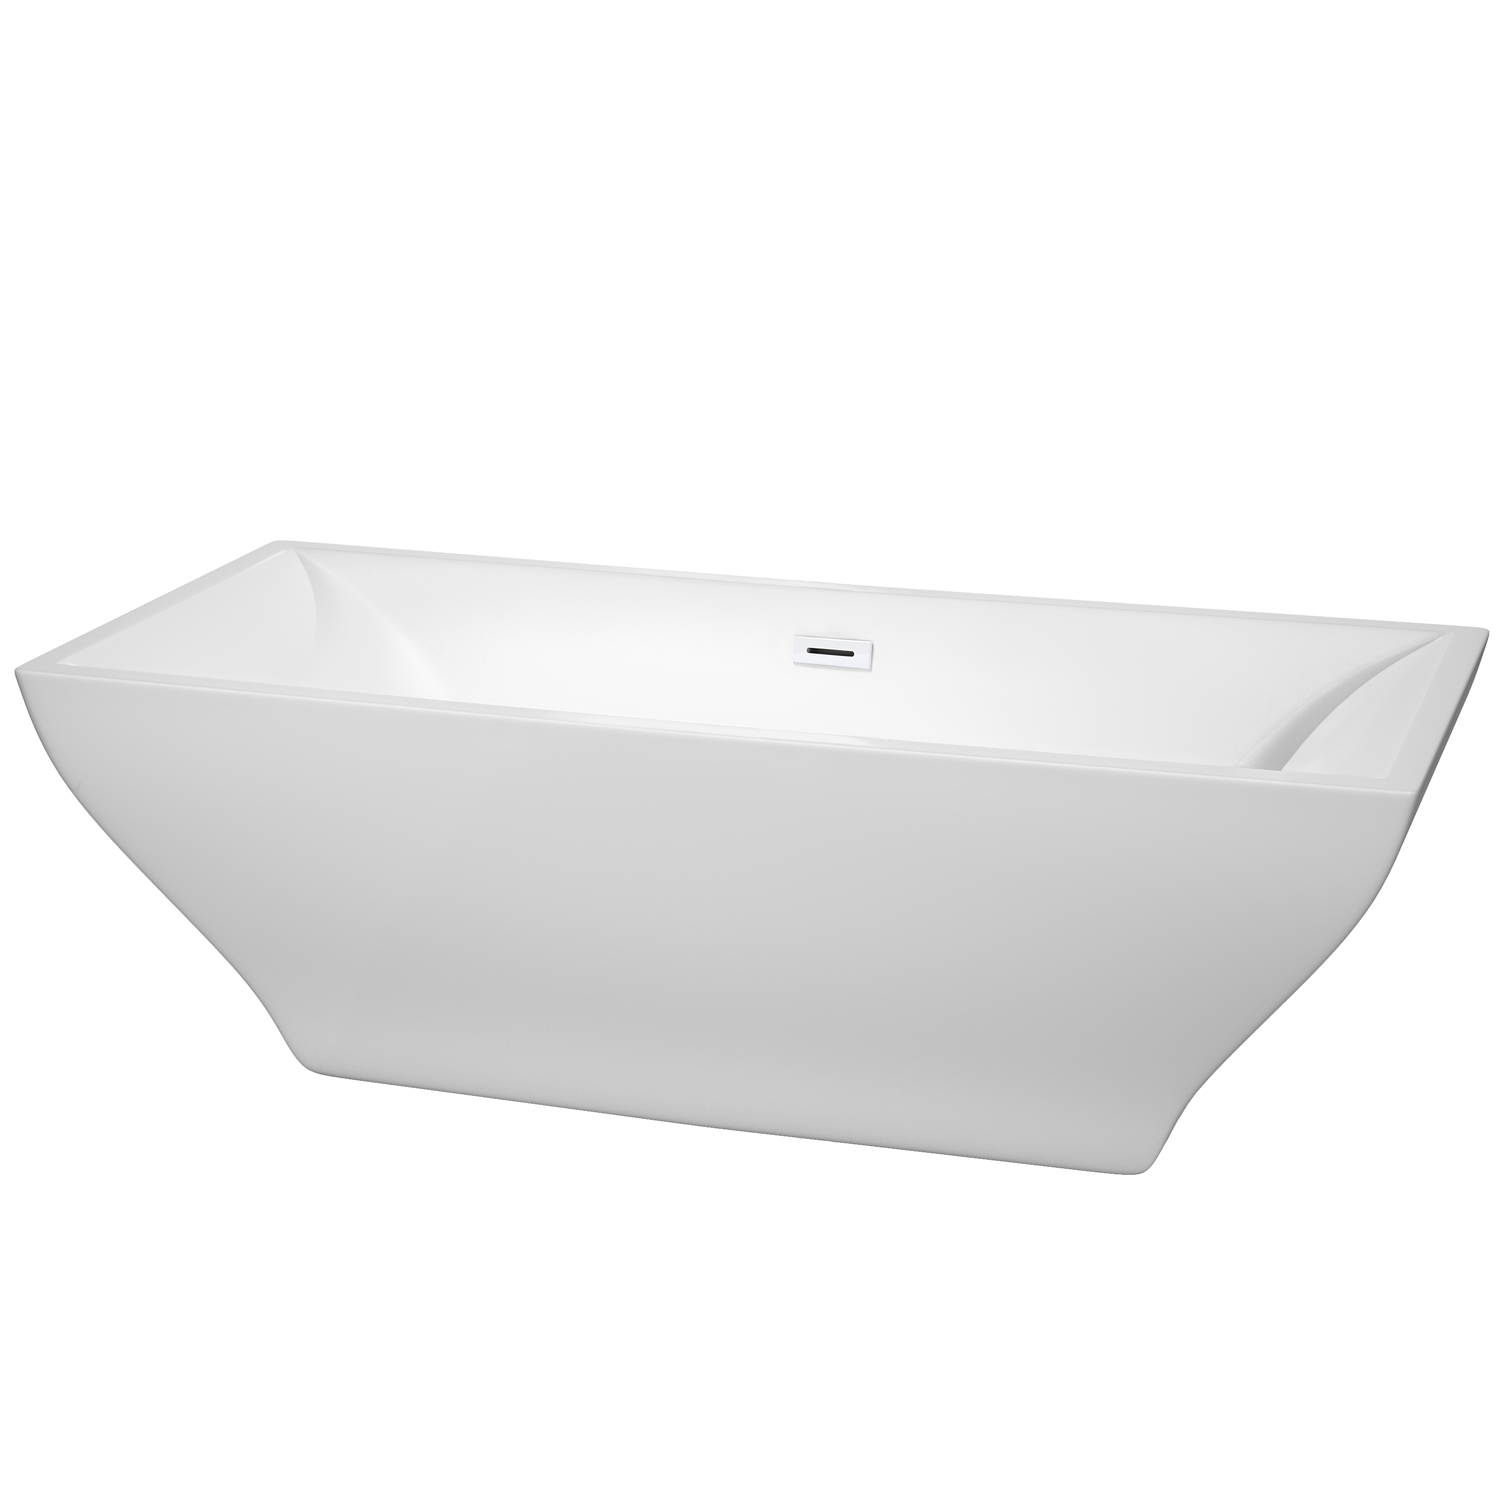 71" Freestanding Bathtub in White with Overflow Trim and Shiny White Drain Finish